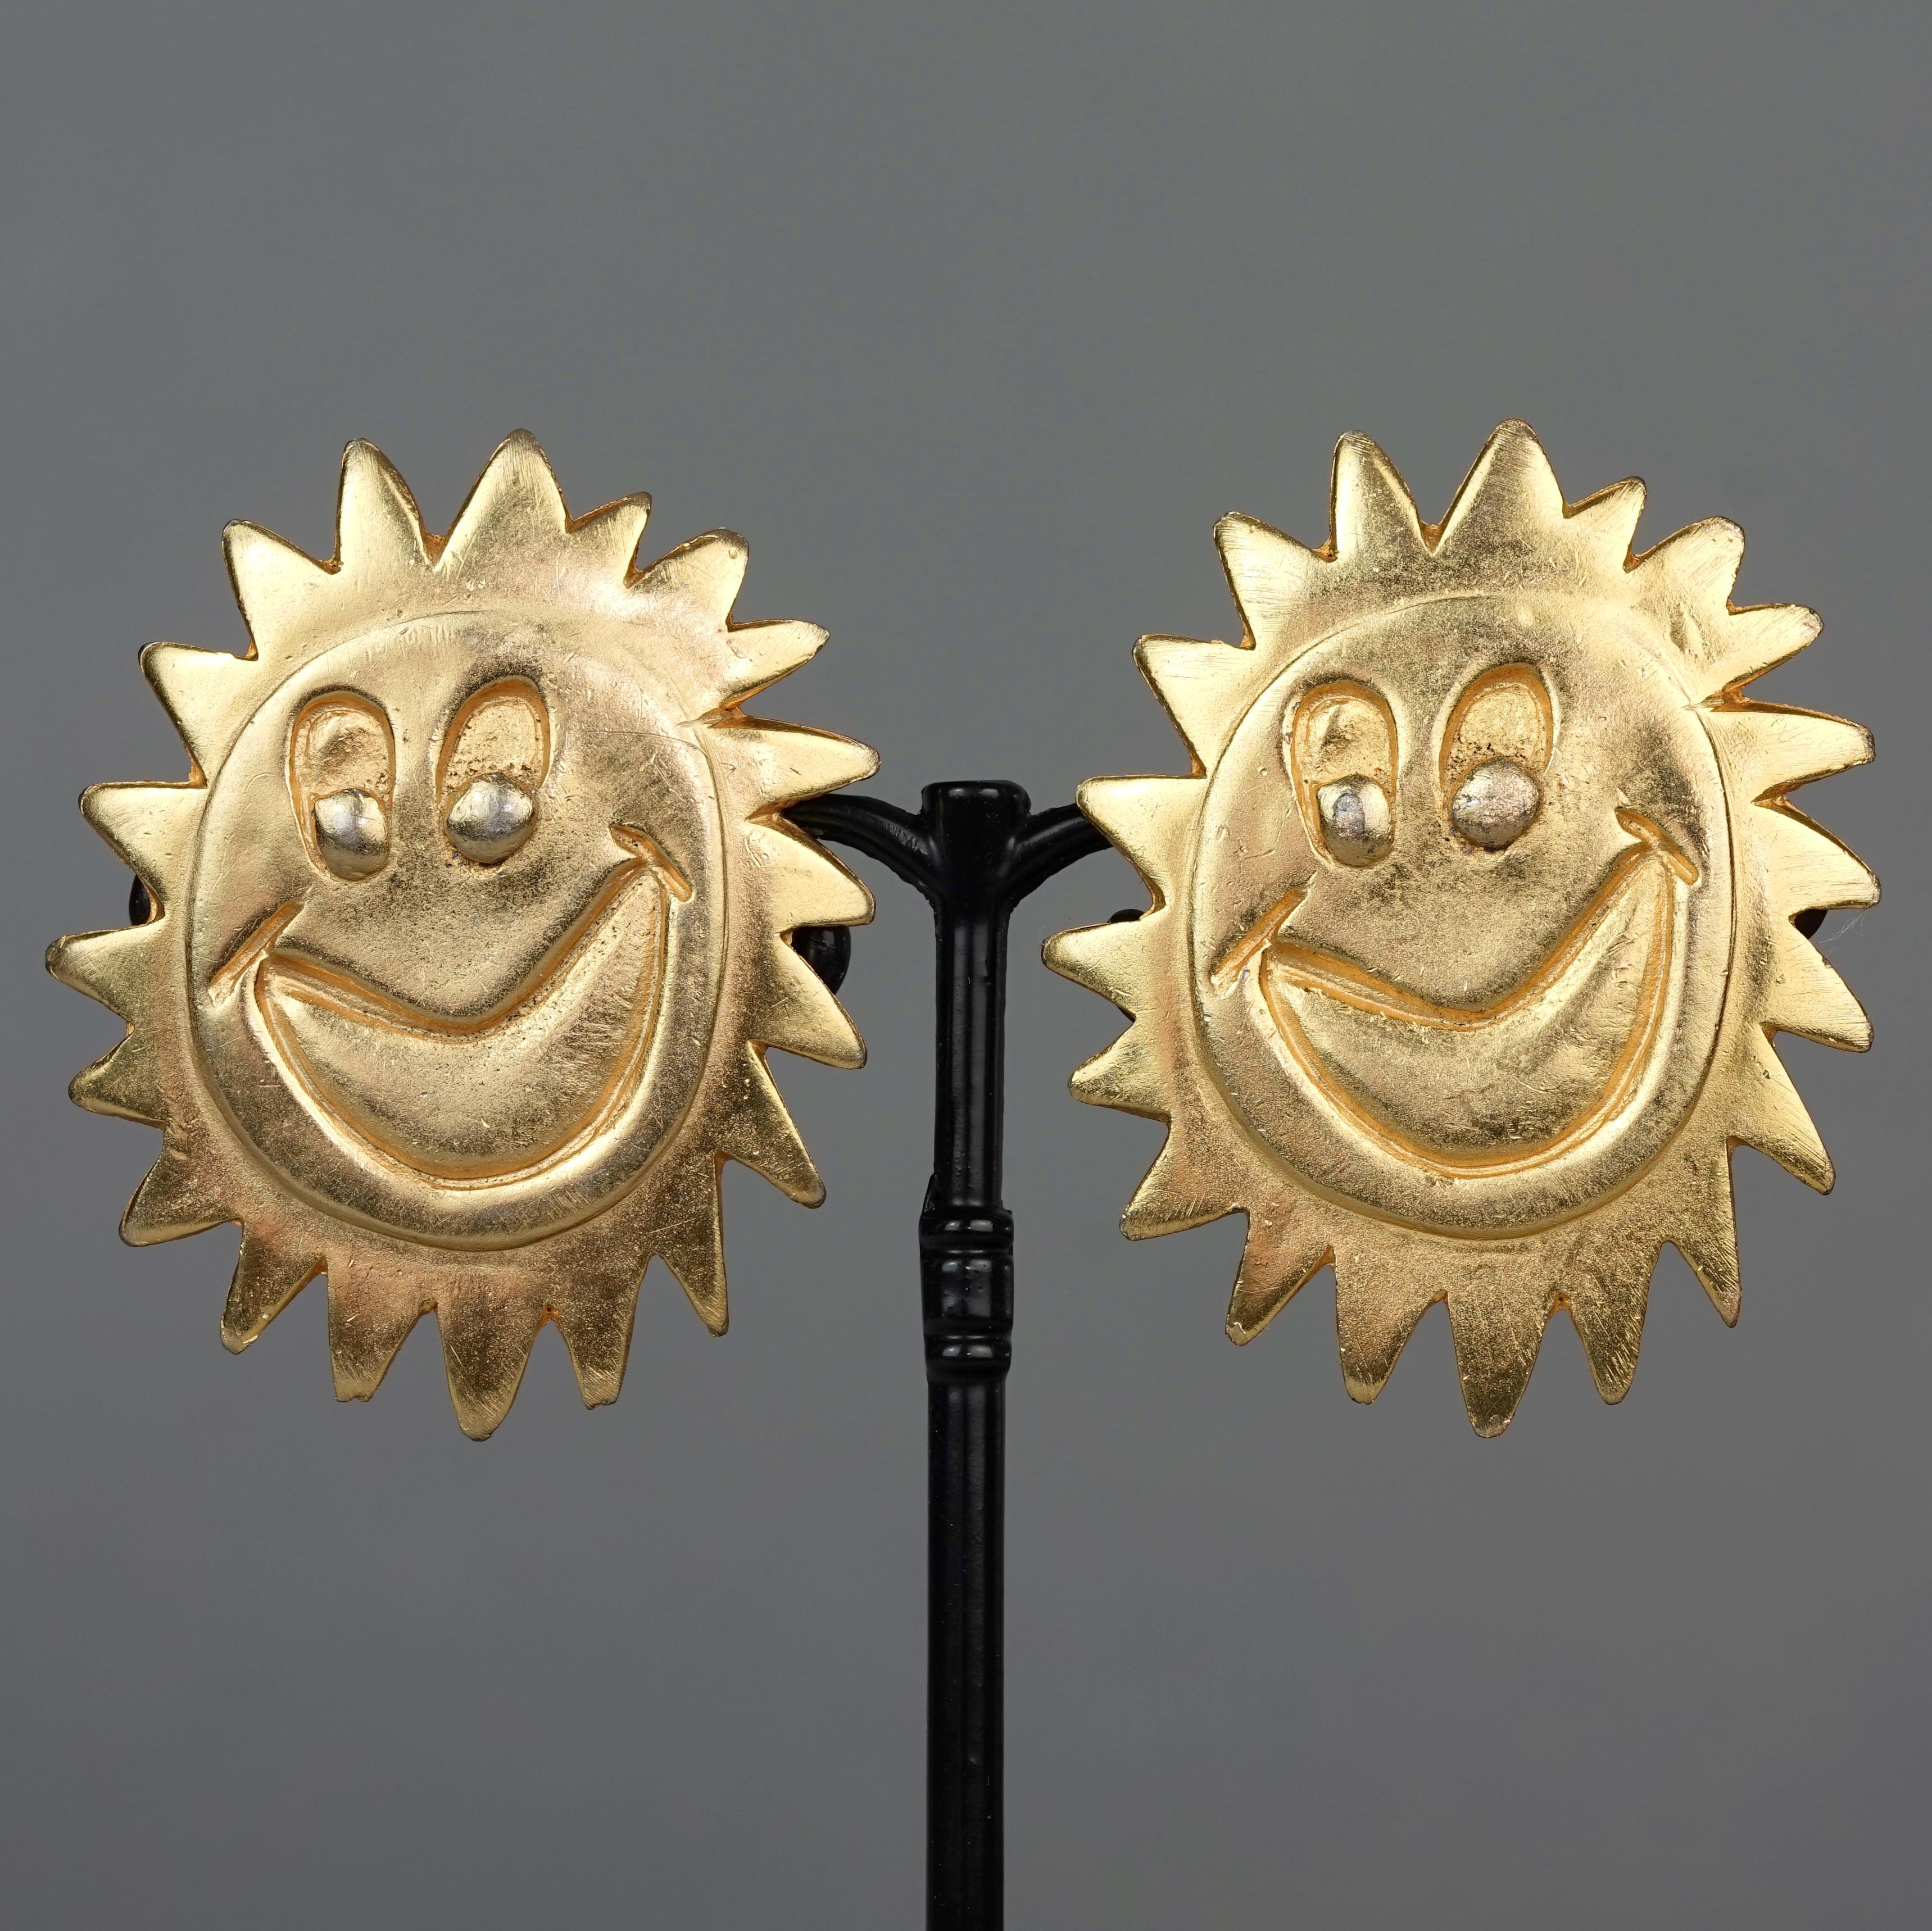 Vintage 1987 BILLY BOY SURREAL Bijoux Smiley Sun Face Earrings

Measurements:
Height: 2 inches (5.1 cm)
Width: 1.61 inches (4.1 cm)
Weight per Earring: 23 grams

Features:
- 100% Authentic 1987 BILLY BOY.
- Textured surreal smiley sun face